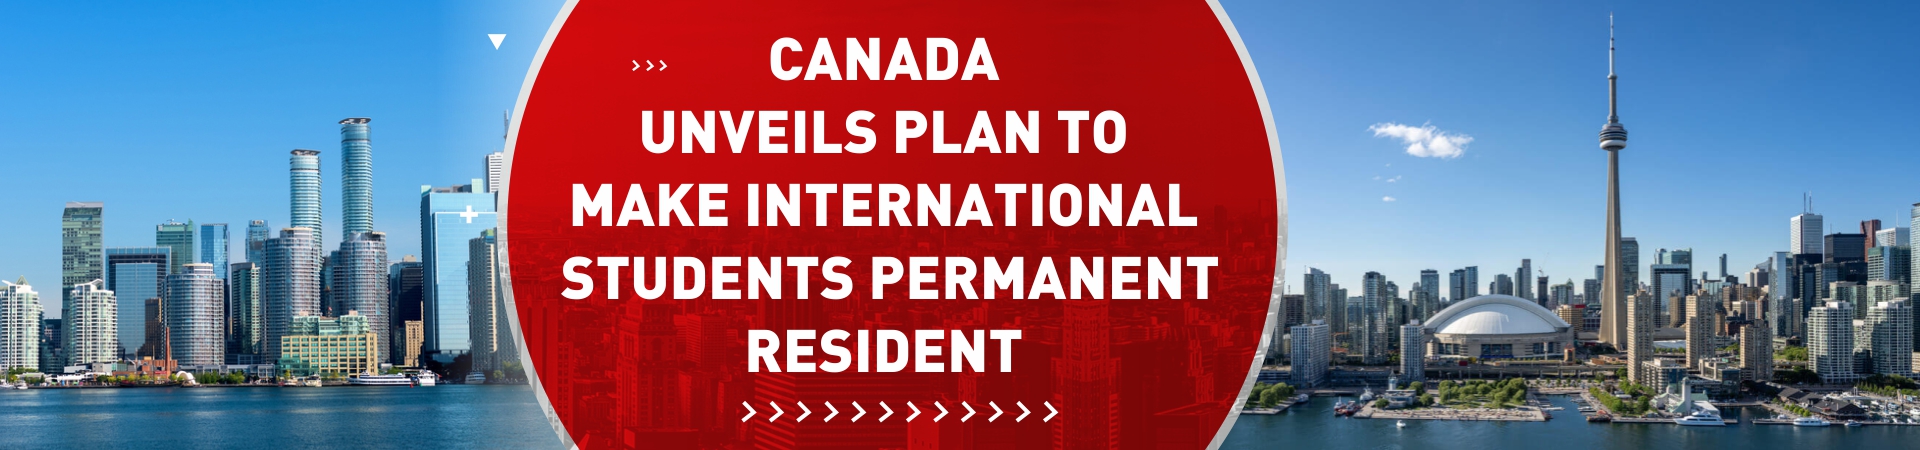 Canada unveils plan to make international students permanent resident 